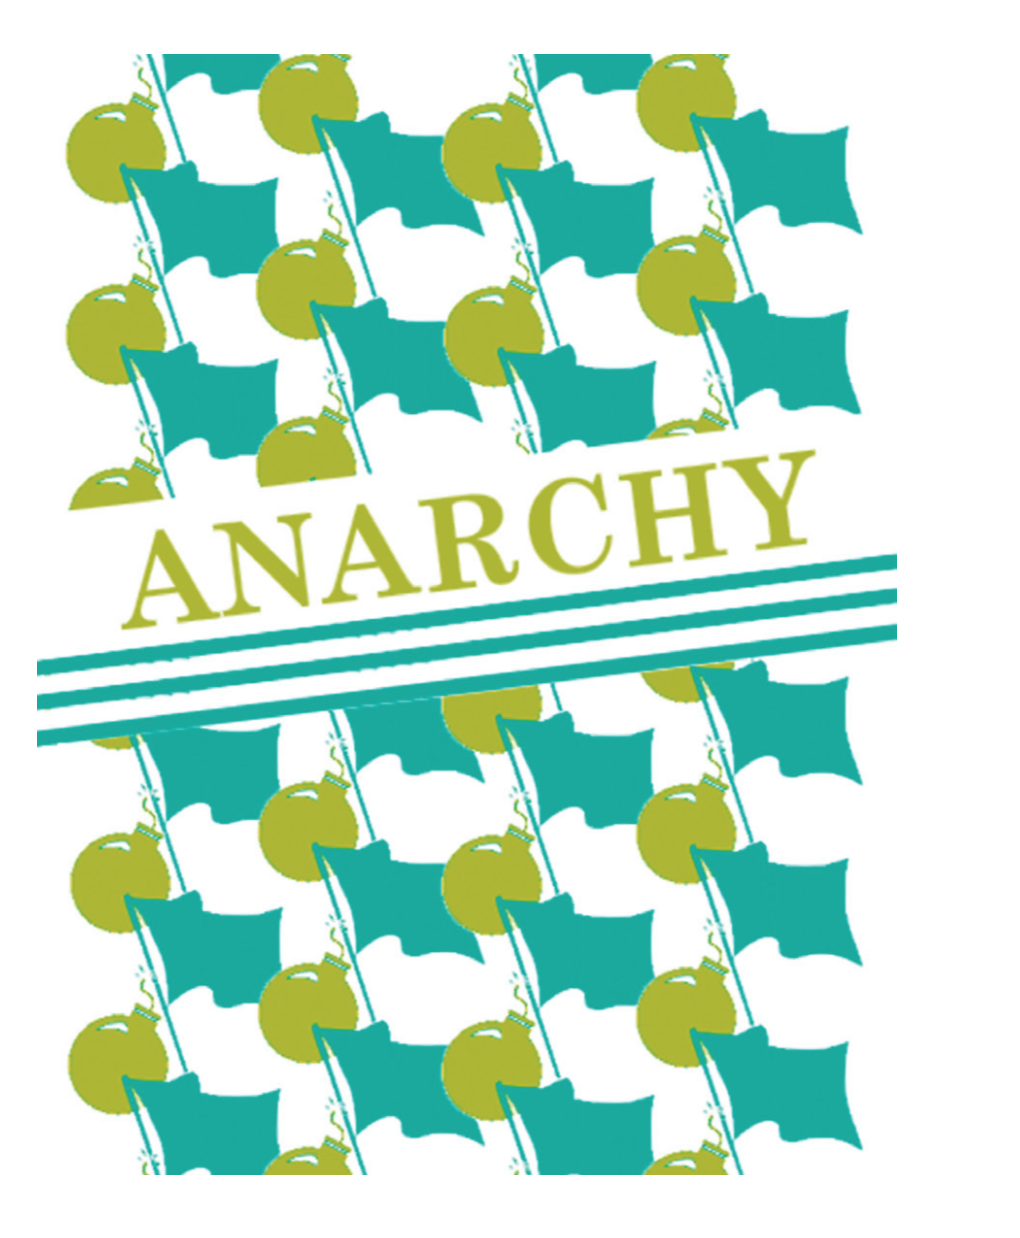 Anarchy Is Anarchy, It Is Both Organiza- Anarchy Is the Thing We Want